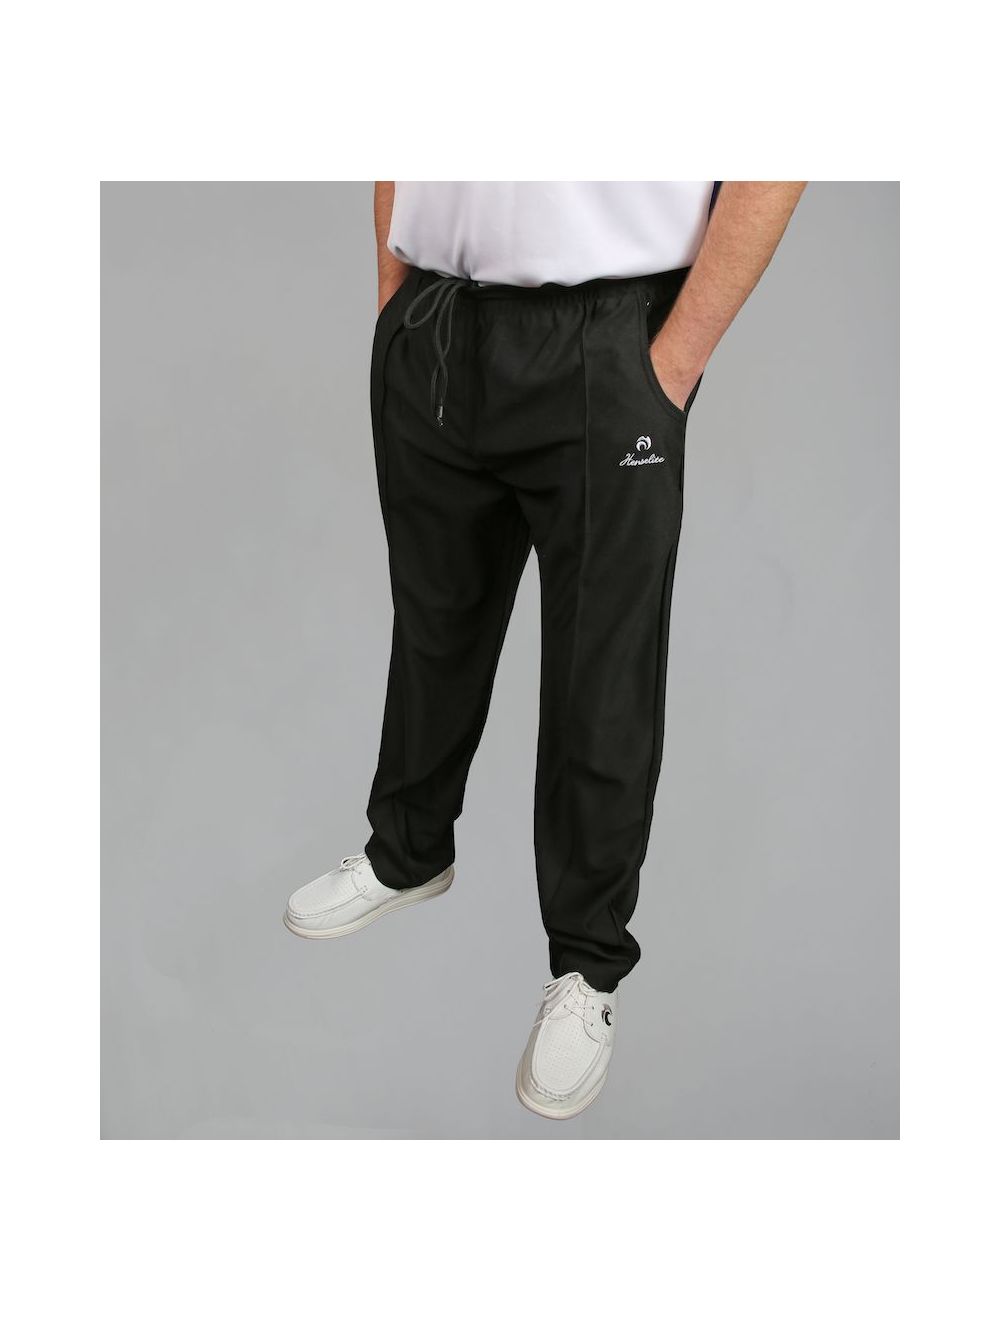 Aero Sports Trousers White at Sports Warehouse Expert advice  quick  delivery